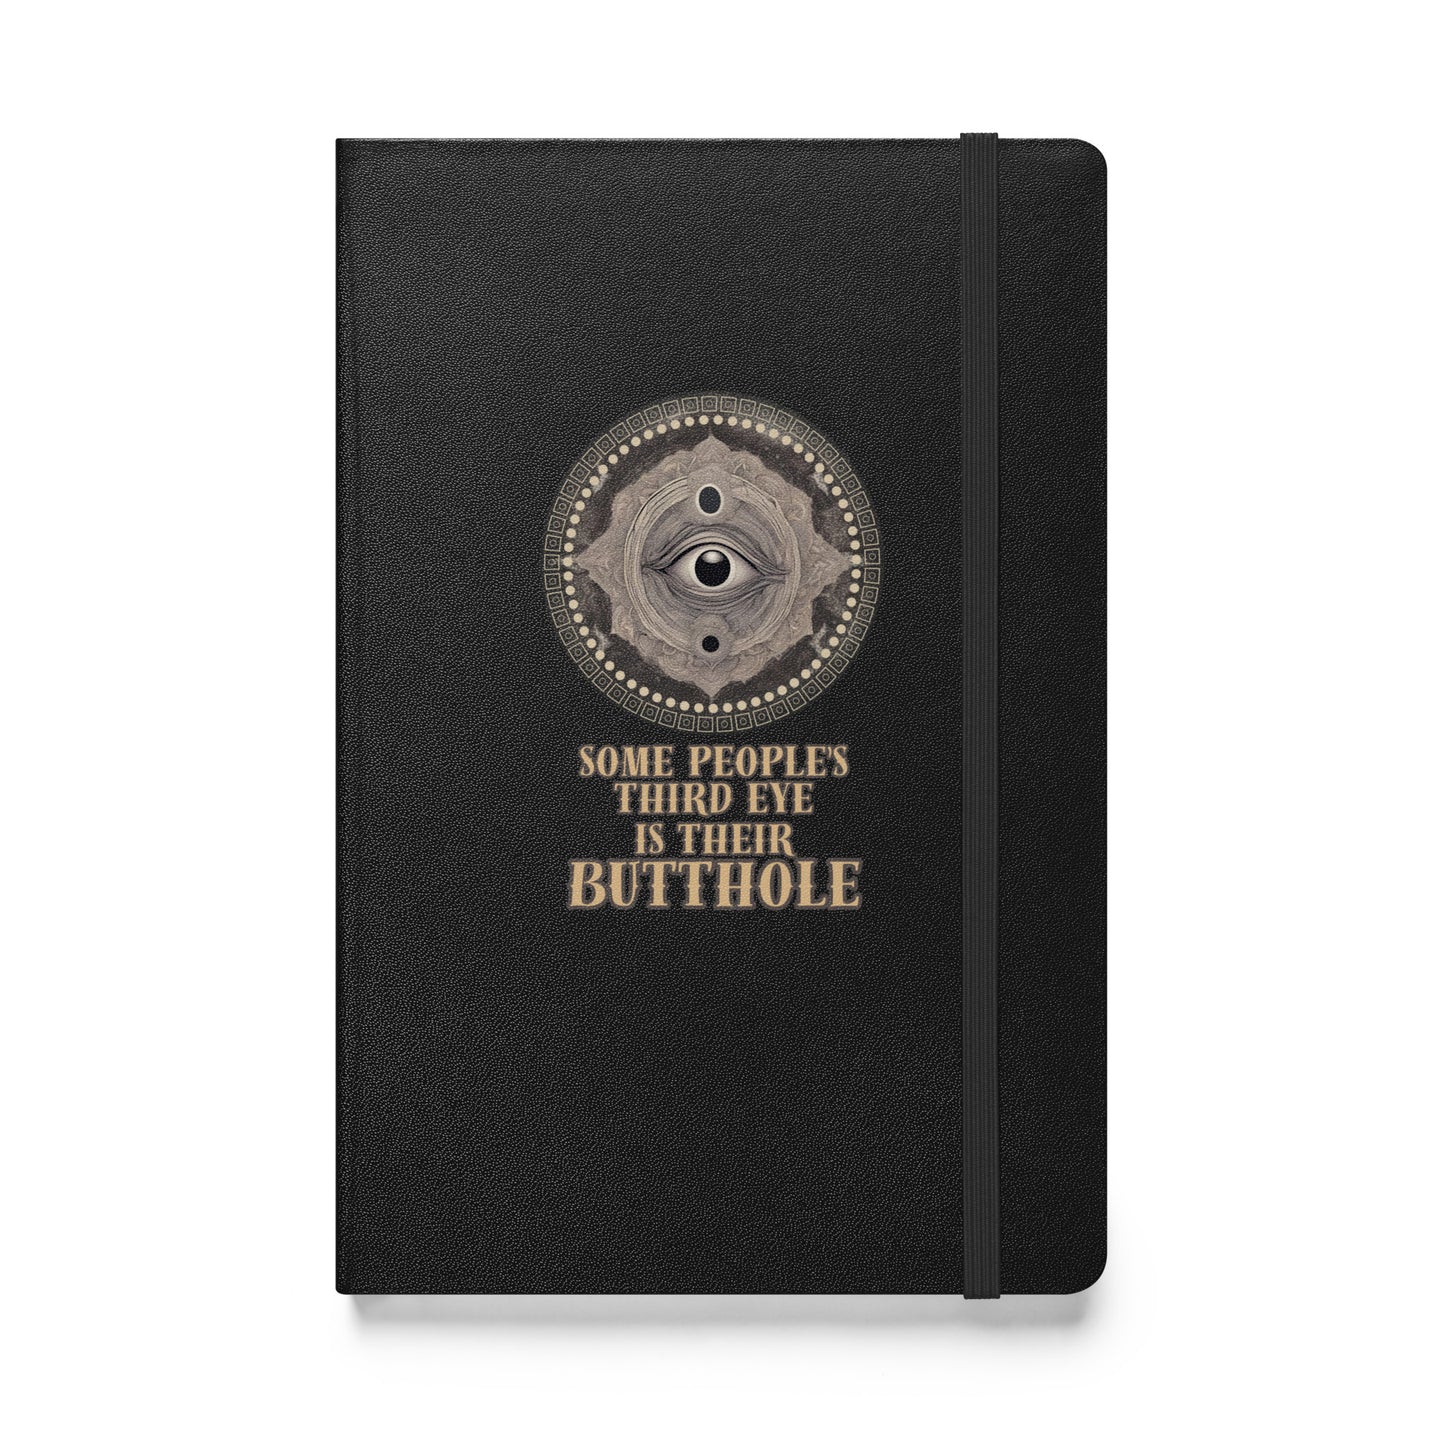 Some People’s Third Eye Is Their Butthole Hardcover bound notebook